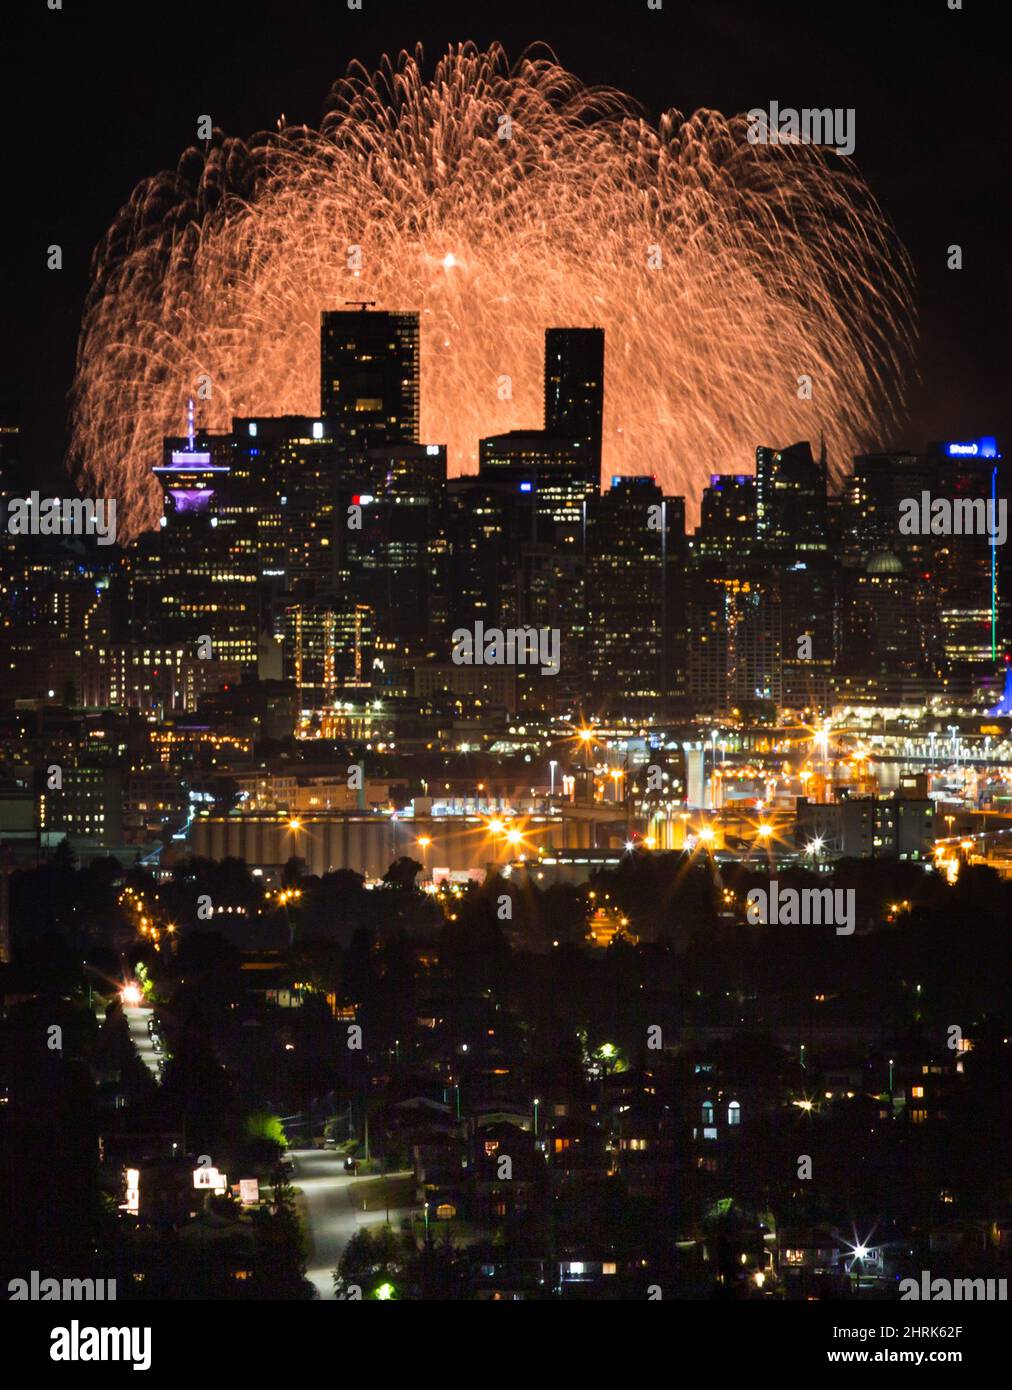 Seen from Burnaby Mountain approximately 16 kilometres away, fireworks explode behind the downtown Vancouver skyline as a pyrotechnic team from Croatia closes out the final night of the Honda Celebration of Light, in Vancouver, on Saturday August 3, 2019. Teams from India, Canada and Croatia competed over three nights shooting off shells from a barge on English Bay at the annual international fireworks festival that draws crowds of hundreds of thousands of people to watch each night. THE CANADIAN PRESS/Darryl Dyck Stock Photo